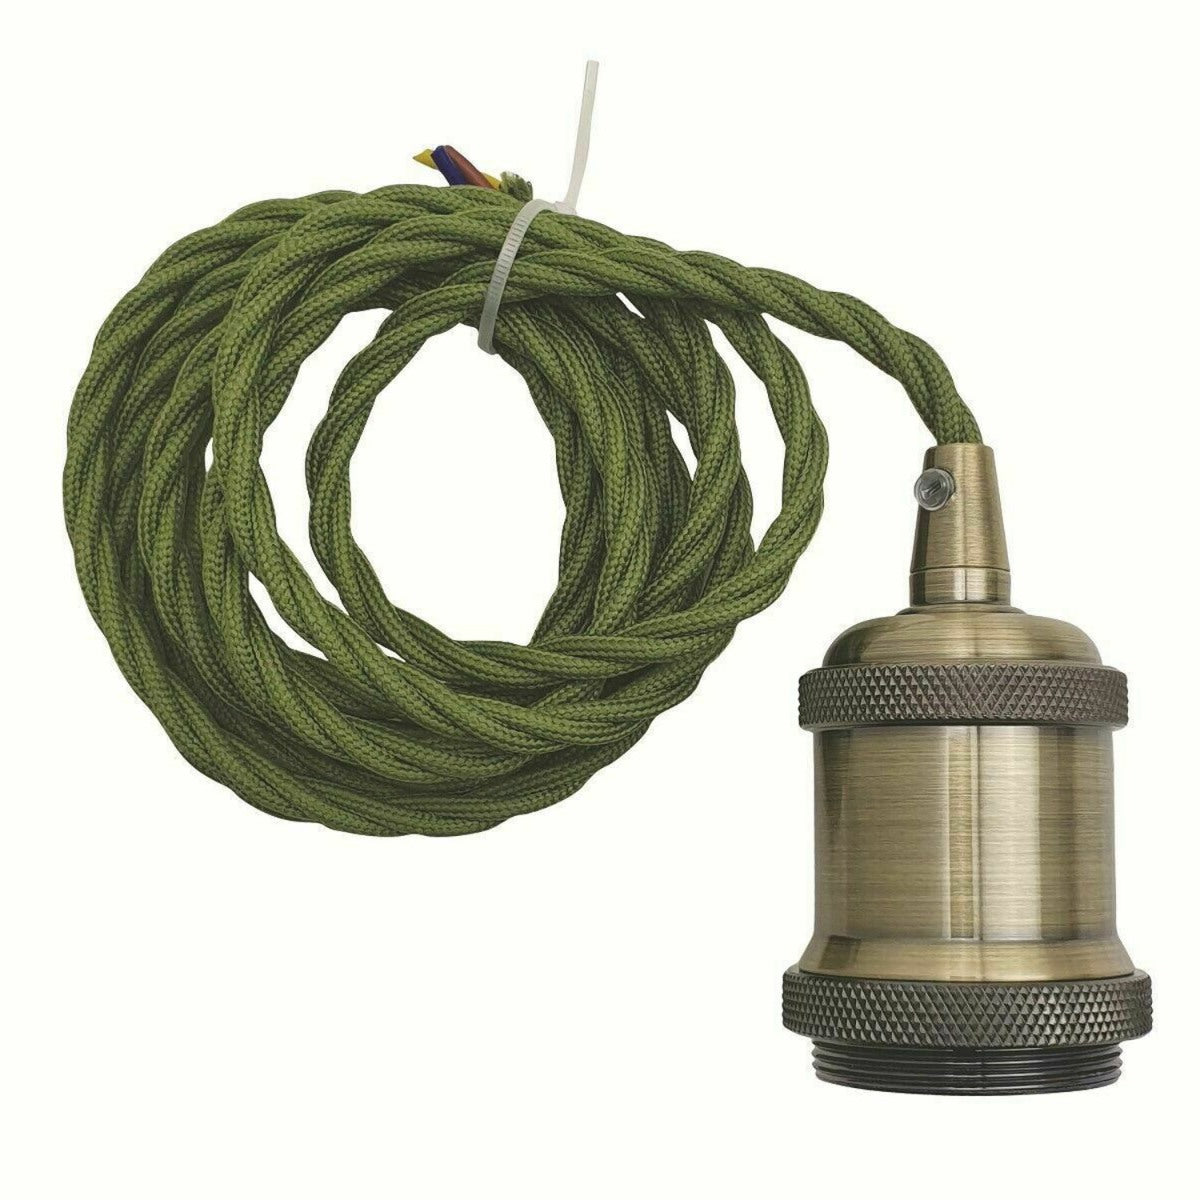 2m Army Green Twisted Cable Pendant E27 Base Green Brass Holder~1732